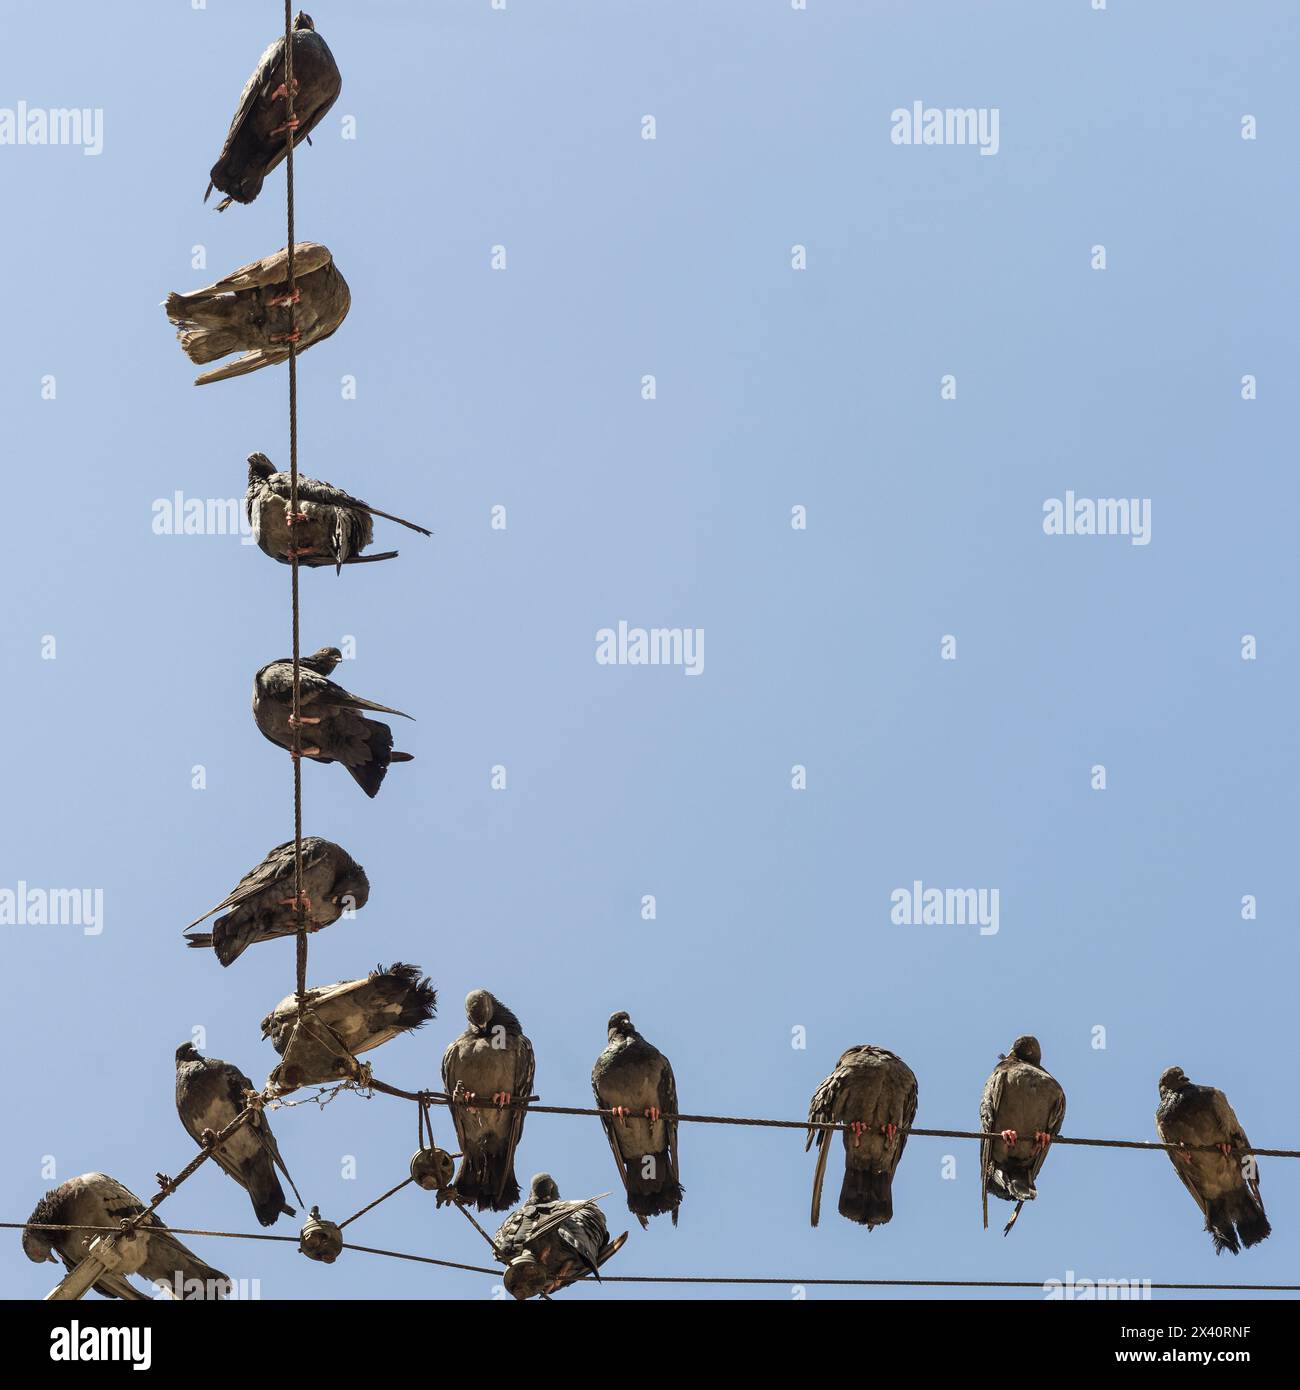 View from directly below of numerous birds perched on a wire against a blue sky; Athens, Greece Stock Photo